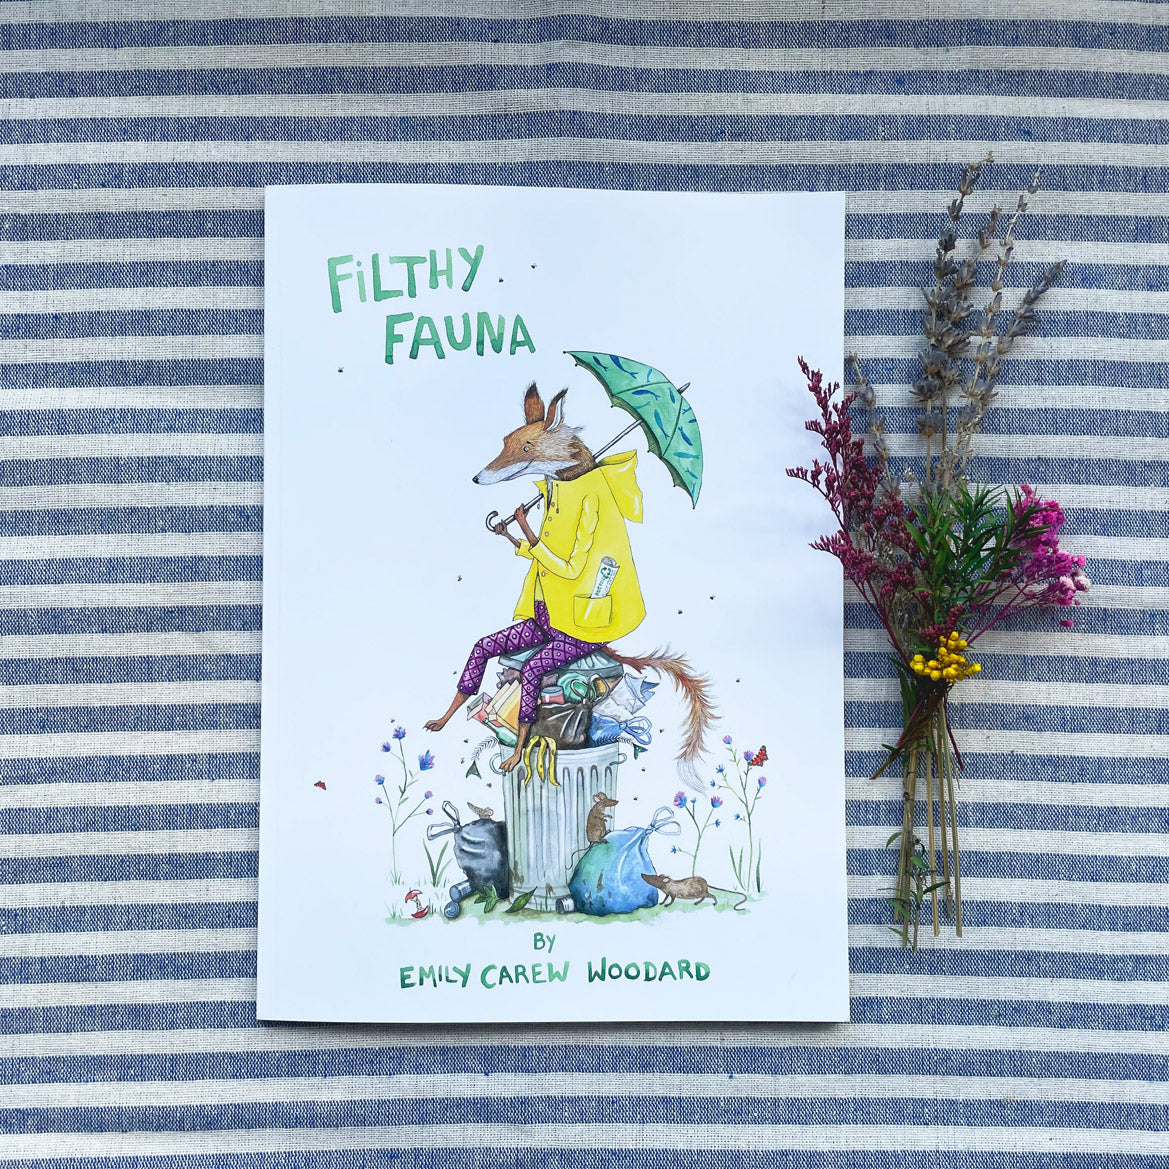 Filthy Fauna an illustrated story (& a free signed print)